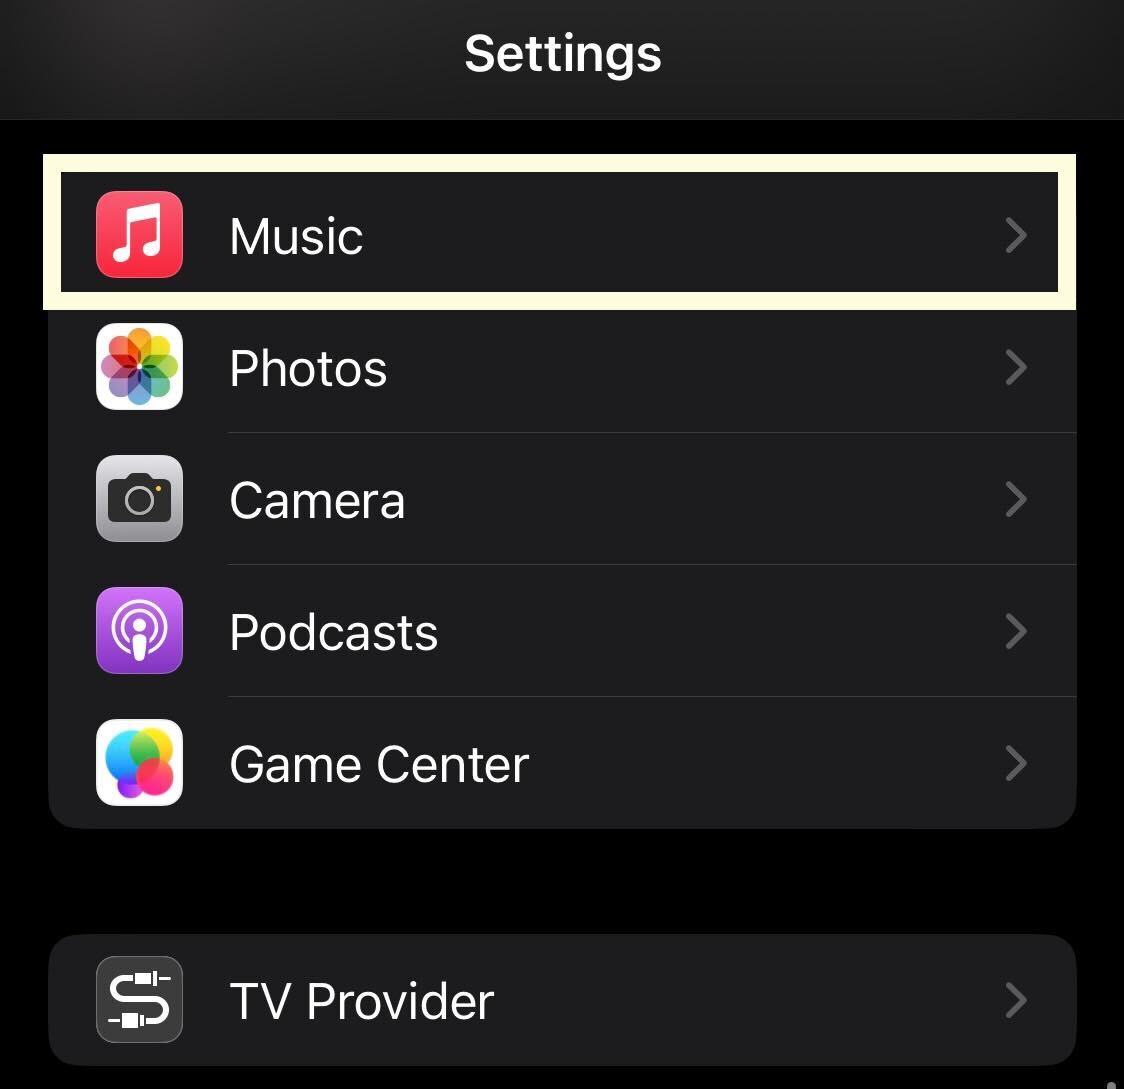 Music button on Settings in iOS